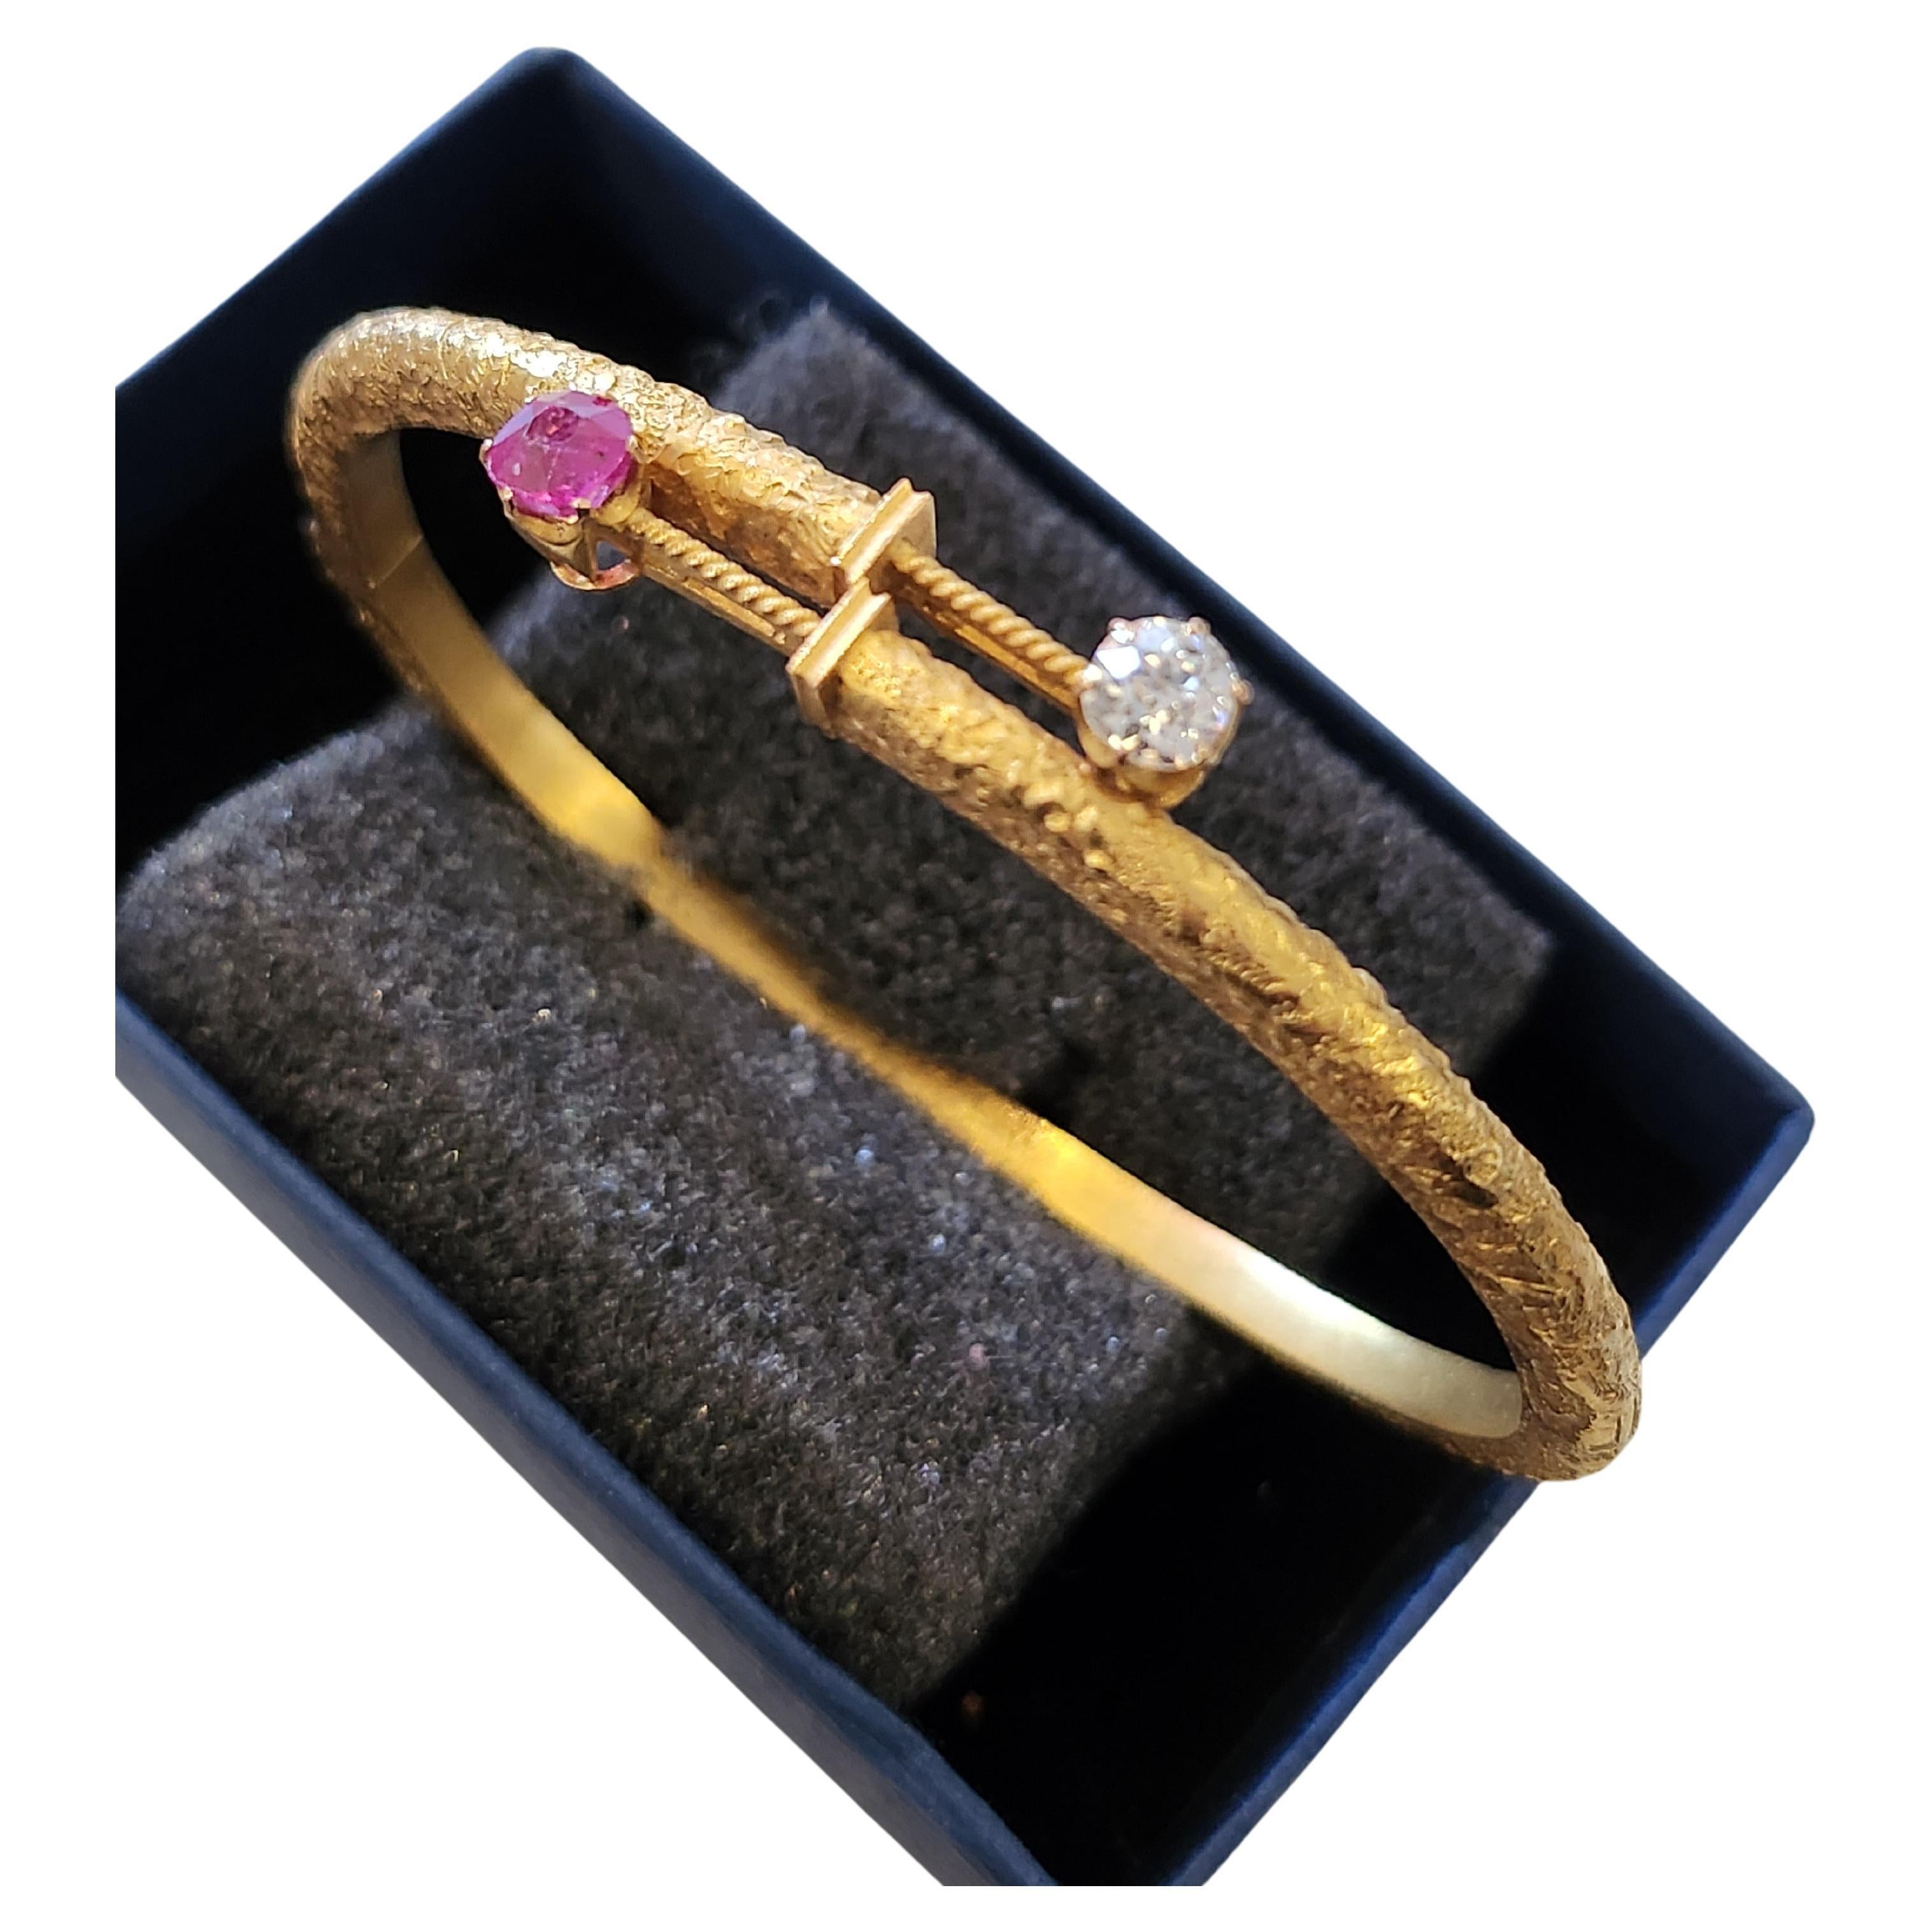 Antique russian cuff braclete in scrubed 14k gold style centered with 1 natural ruby and 1 old mine cut diamond braclete was made in st petersburg 1899.c imperial russian era braclete width 6.5 cm and total gold weight of 9 grams hall marked 56